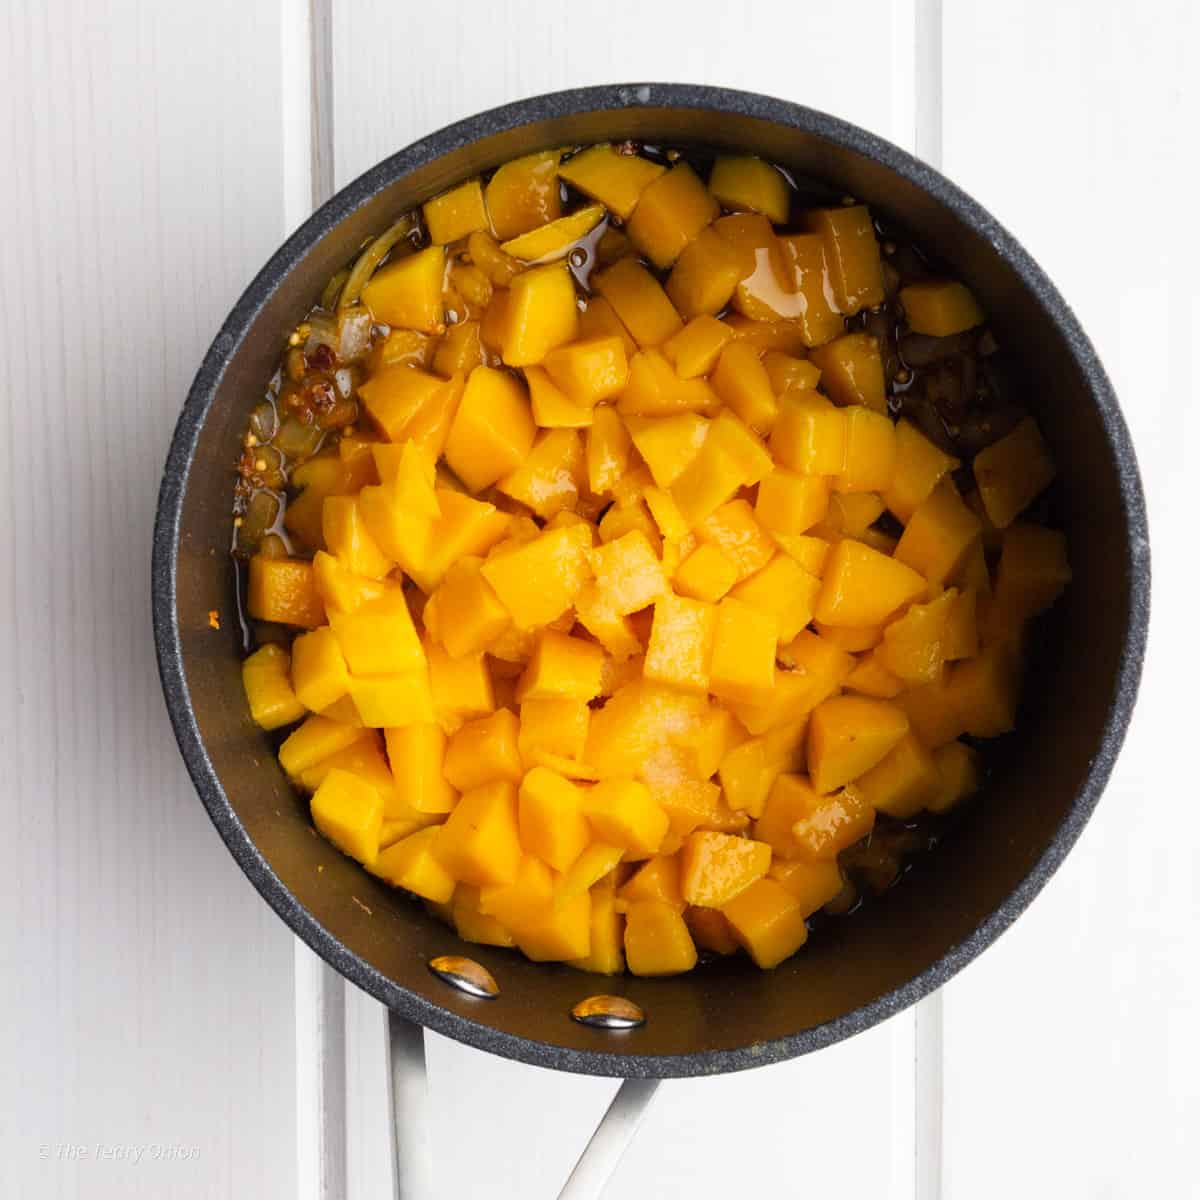 Diced mango in a small saucepan with sautéed onions and spices.